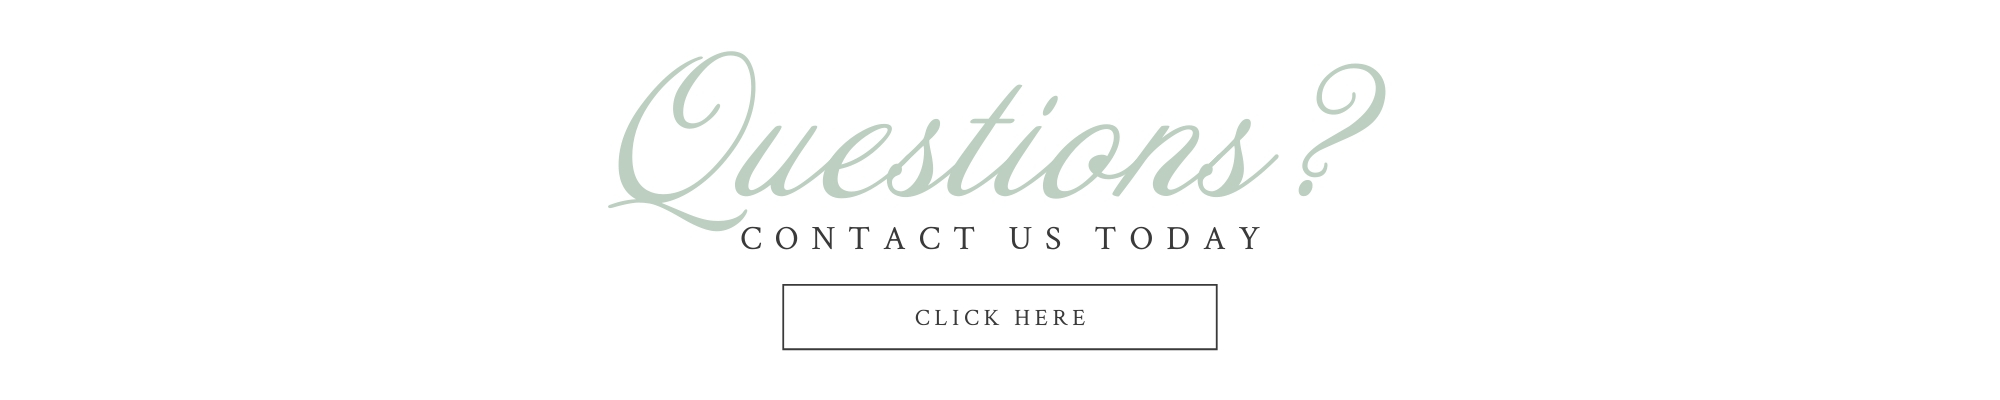 have questions? Contact us!